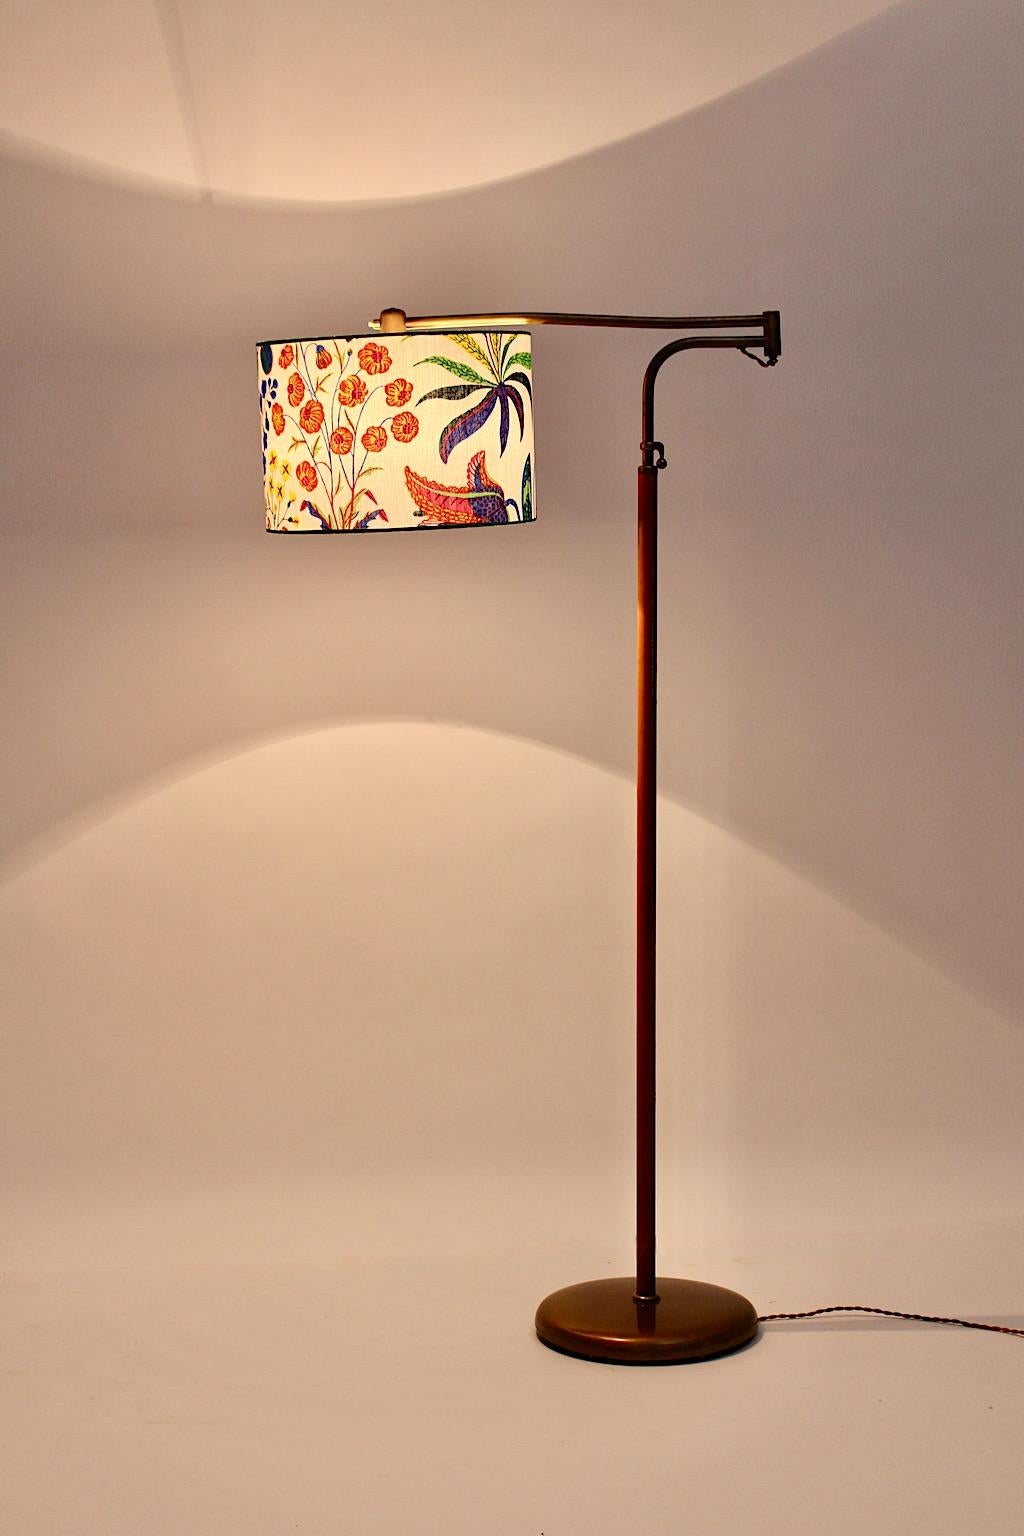 Mid Century Modern vintage floor lamp from brass and leather by J.T.Kalmar 1946 Vienna.
A gorgeous iconic floor lamp from brass and hand stitched leather in brown color by J.T. Kalmar 1946 with a circular iron base encased with brass.
Embossed